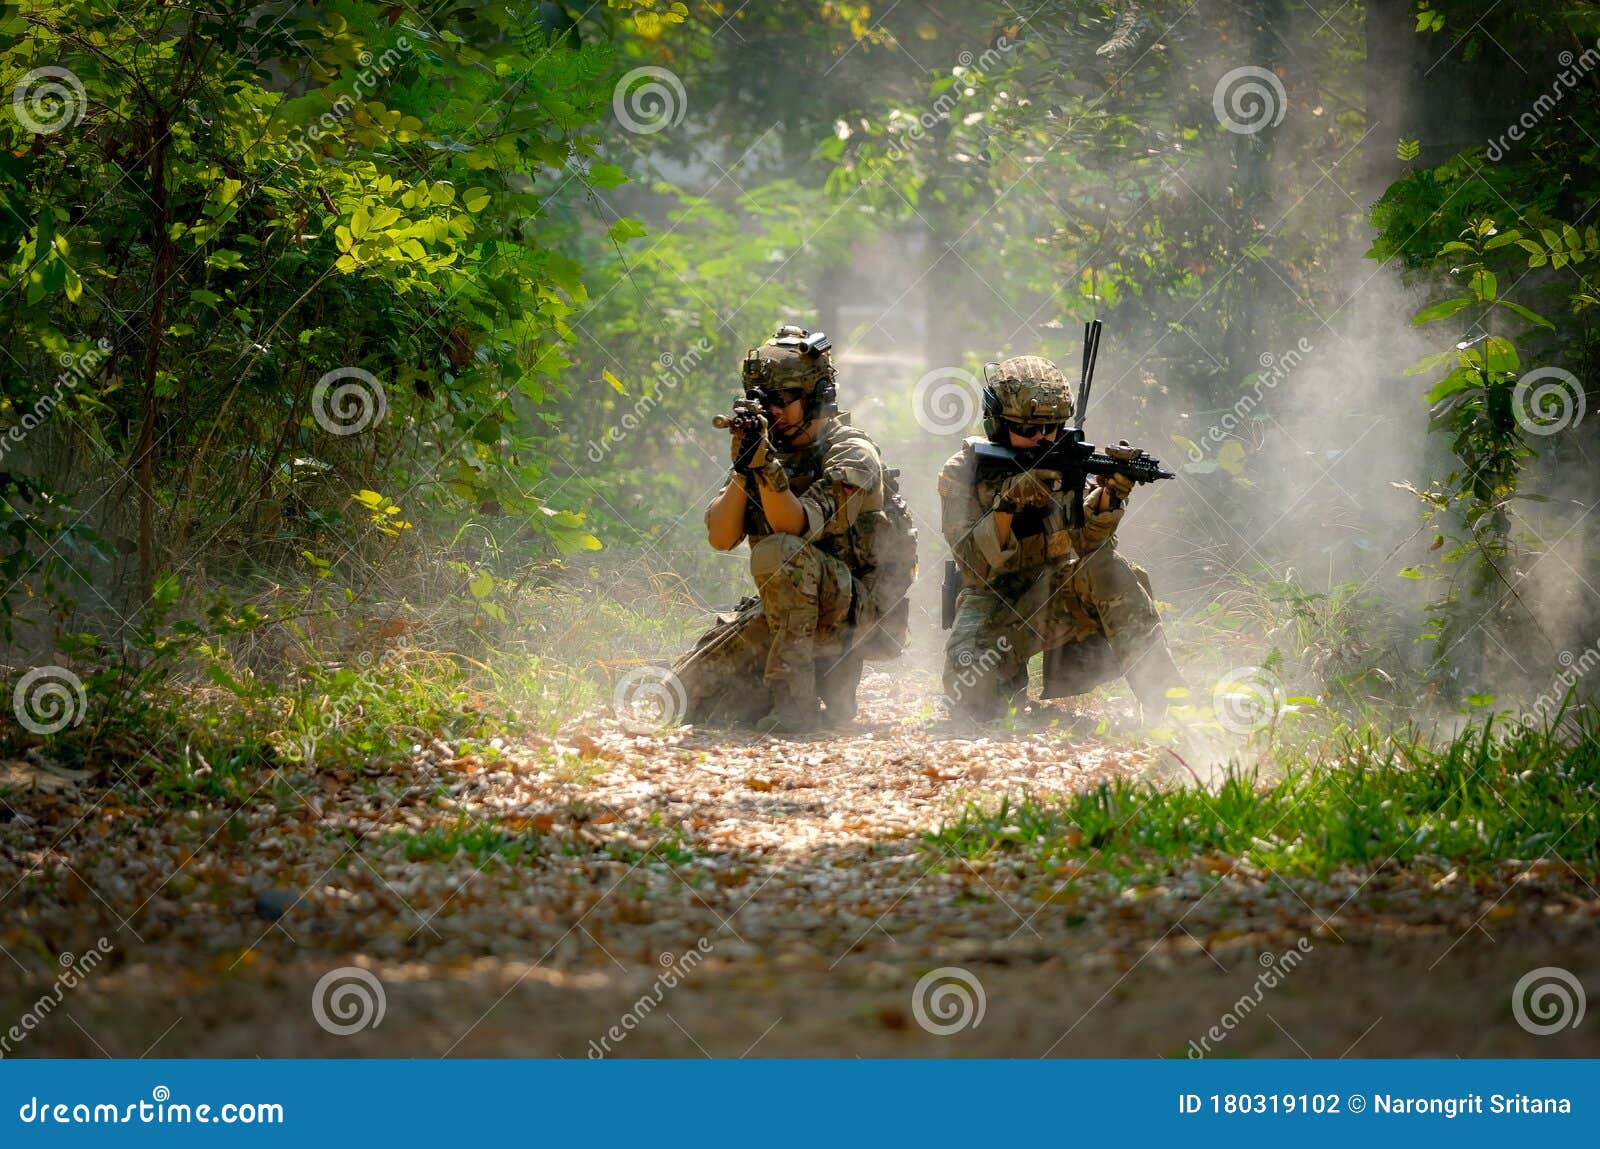 two soldiers with the fighting uniform sit on the ground and point gun to target for the concept war battle in jungle